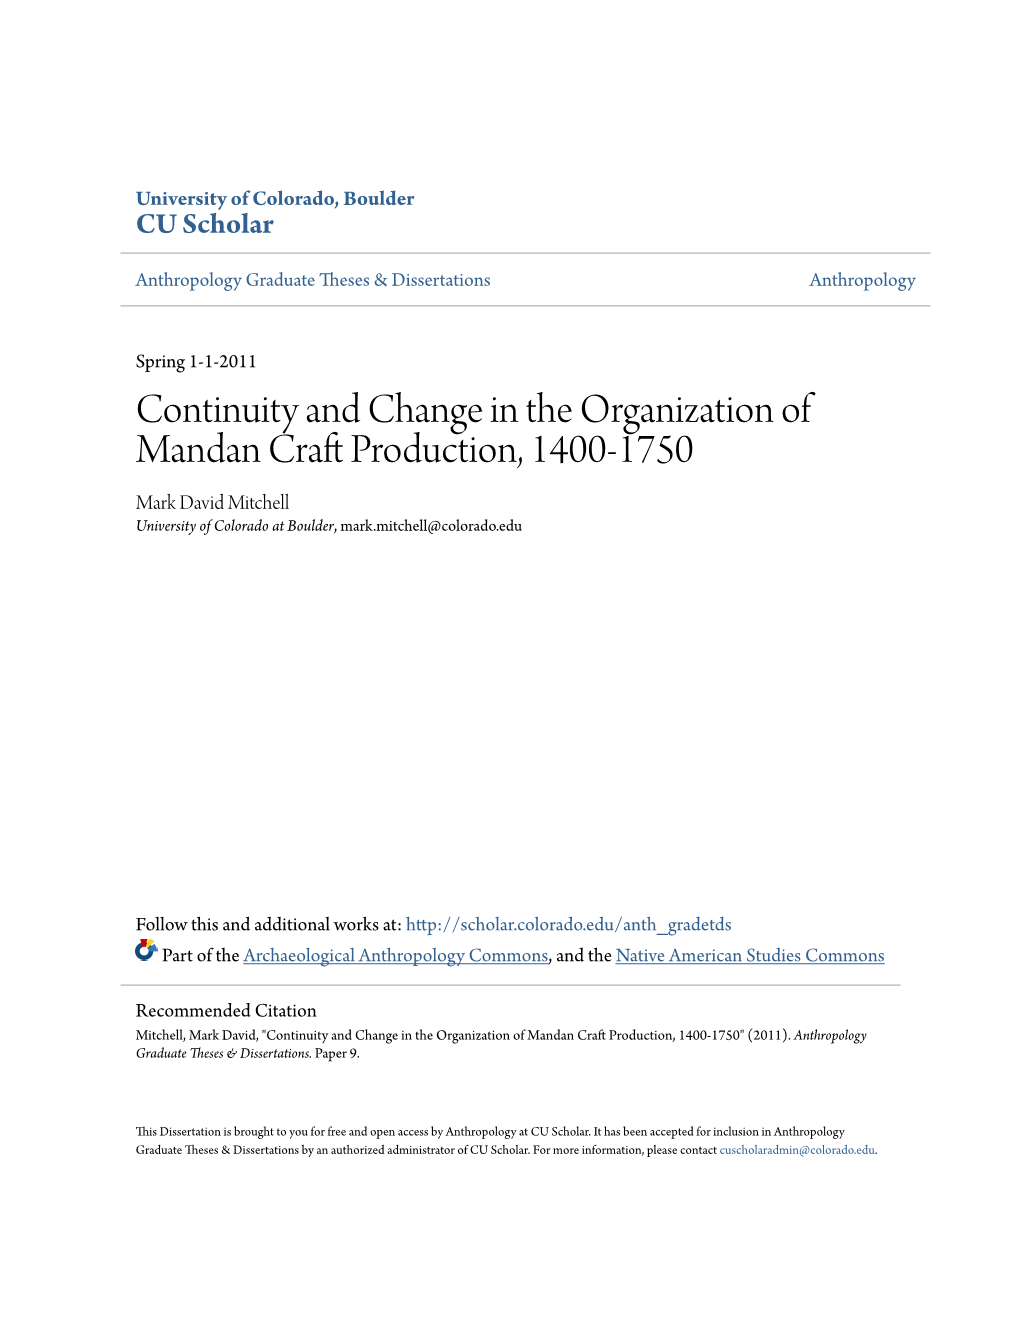 Continuity and Change in the Organization of Mandan Craft Rp Oduction, 1400-1750 Mark David Mitchell University of Colorado at Boulder, Mark.Mitchell@Colorado.Edu